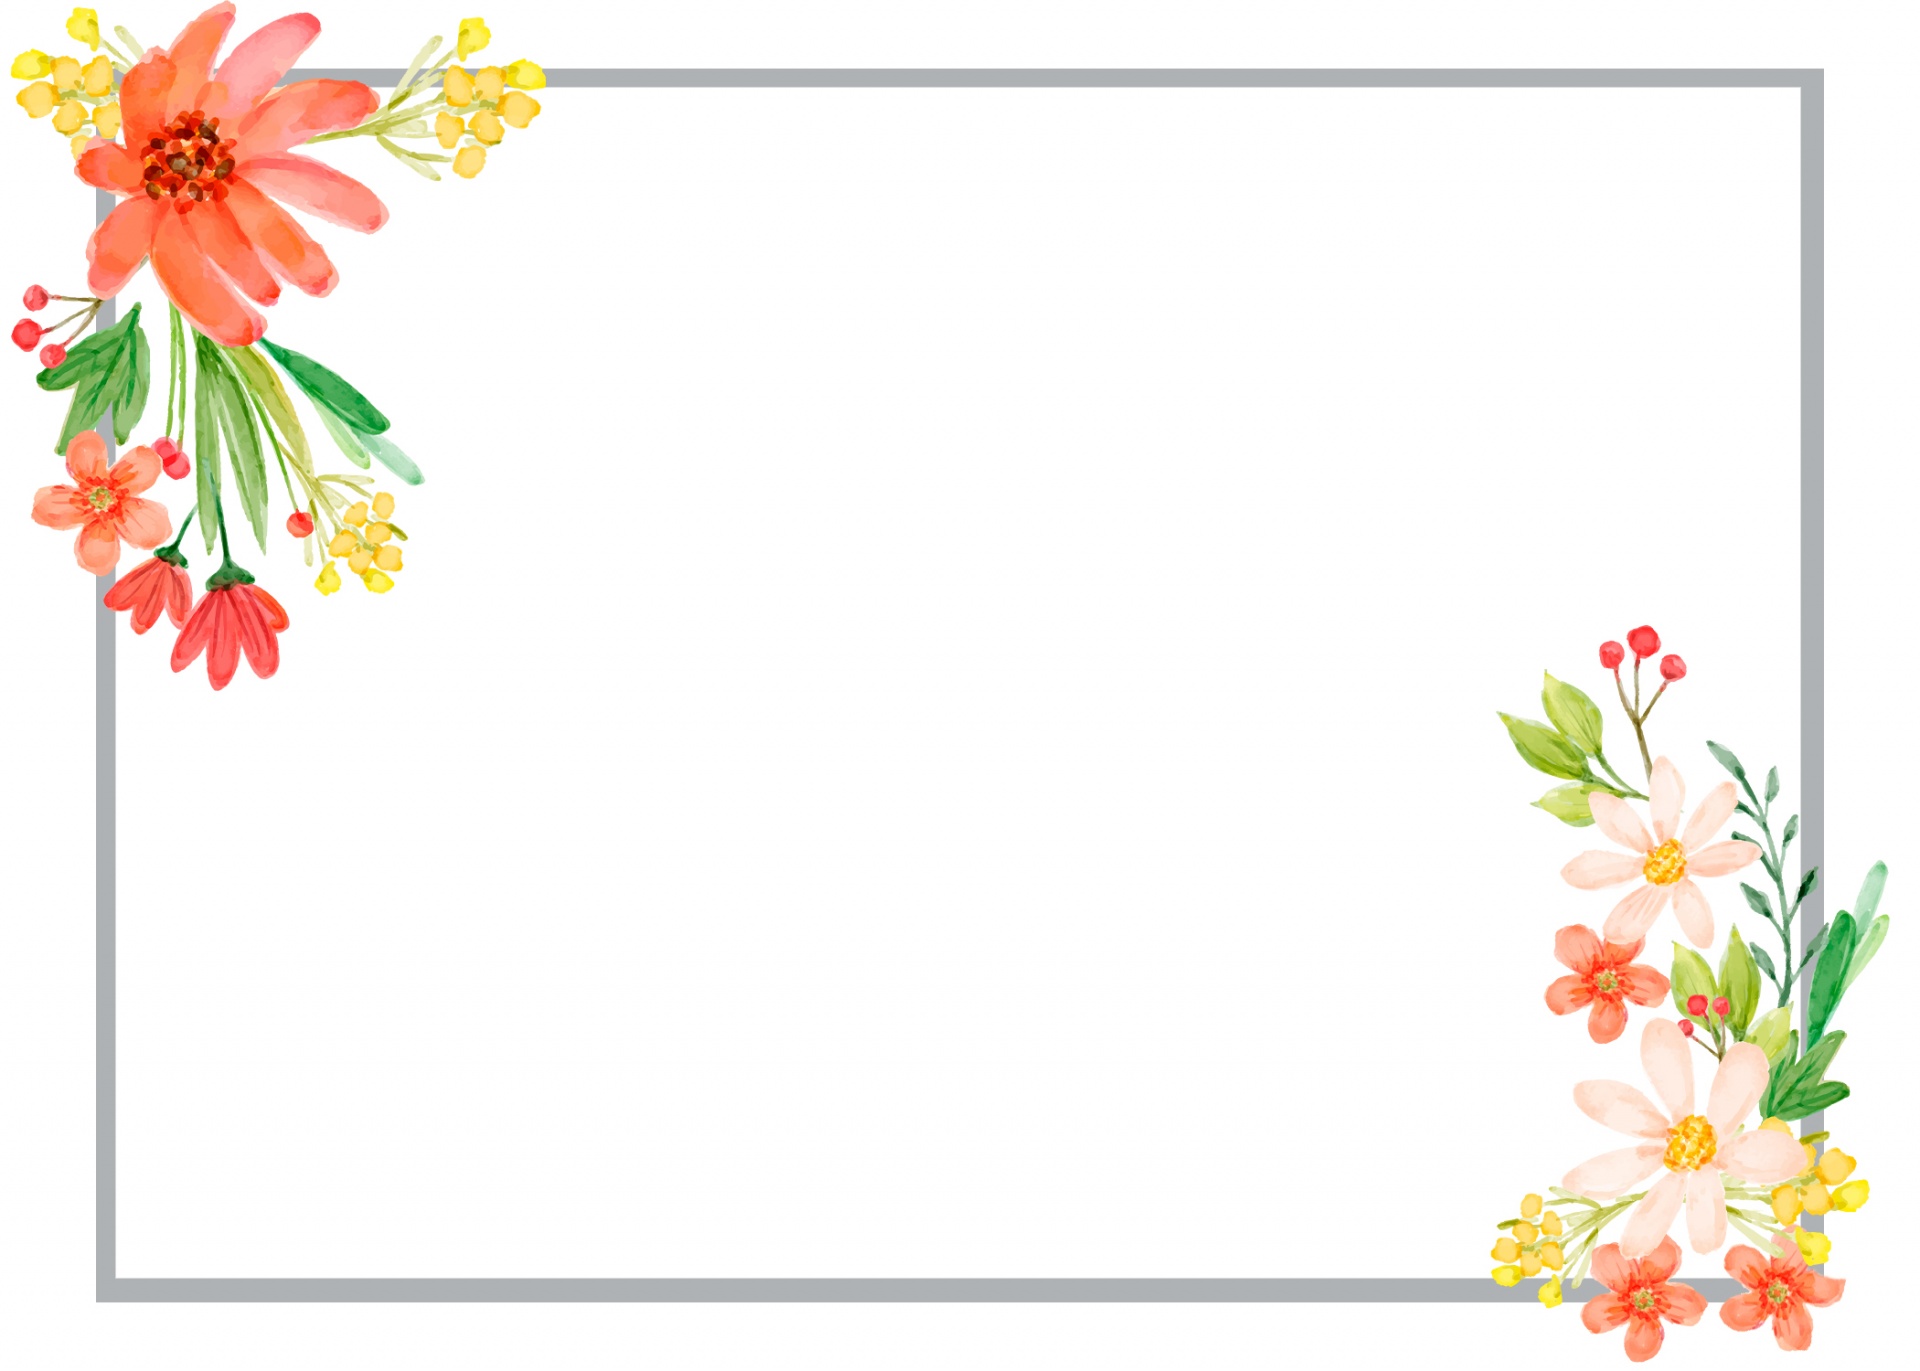 floral-invitation-card-5-x-7-free-stock-photo-public-domain-pictures